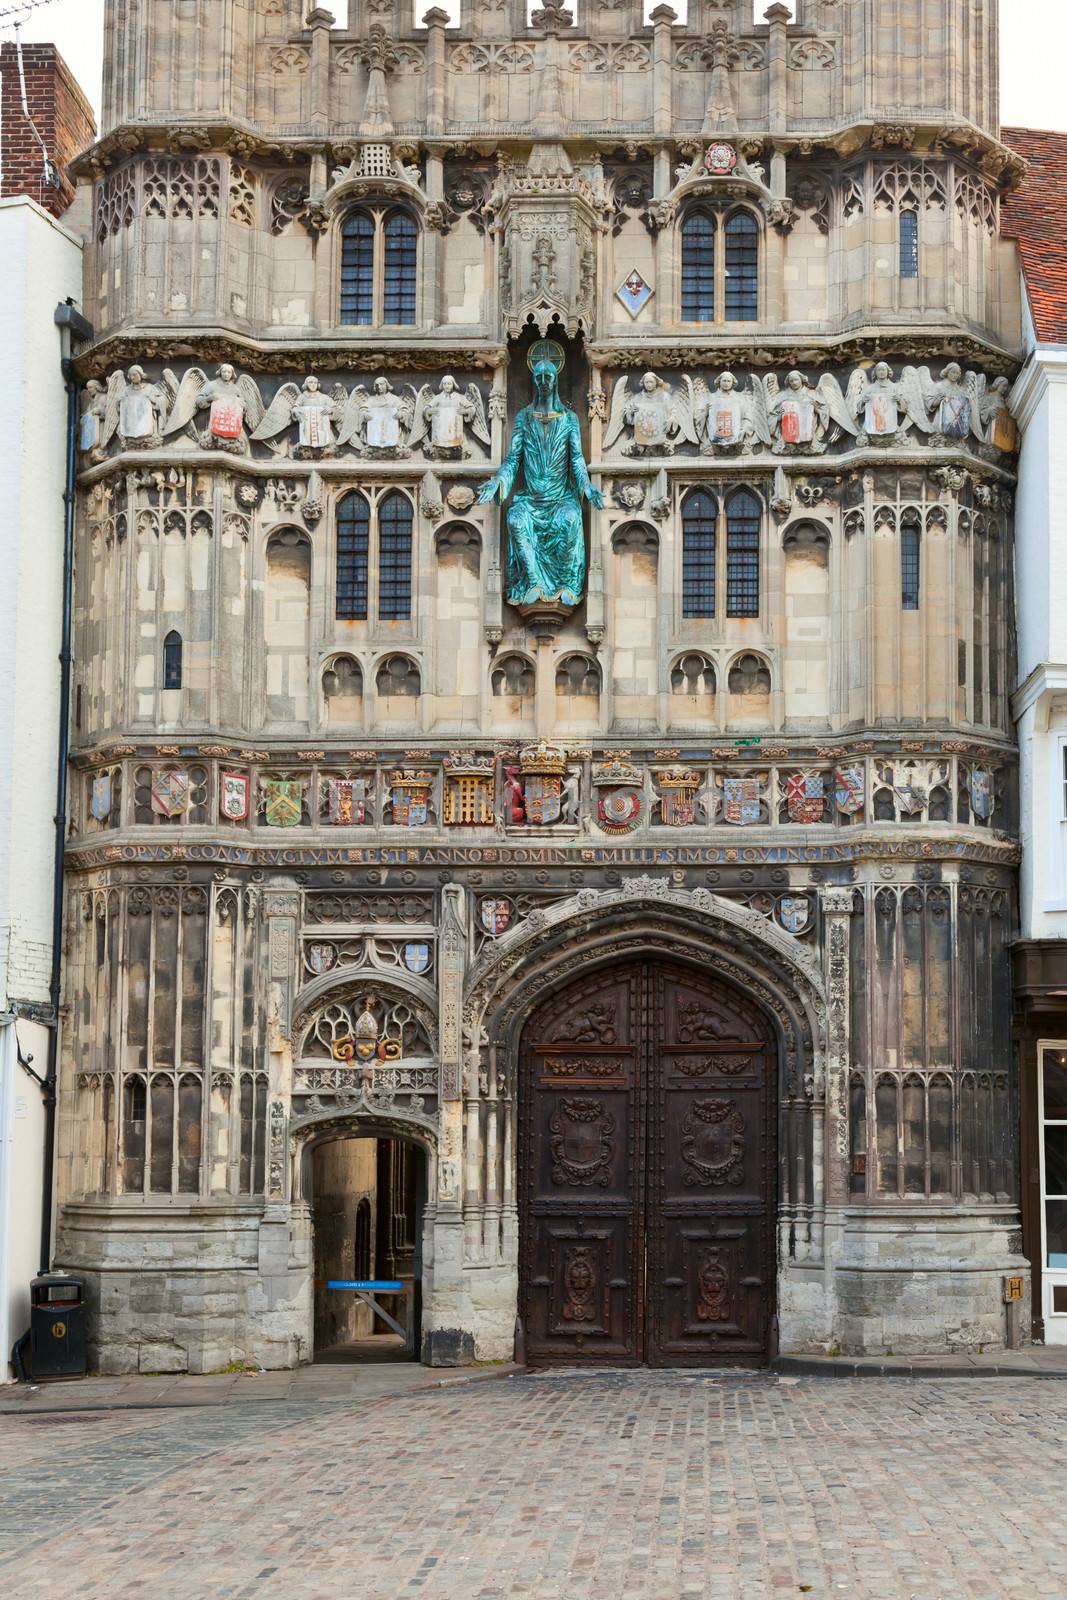 Jesus Christ statue over the city entrance of Canterbury Cathedral in England